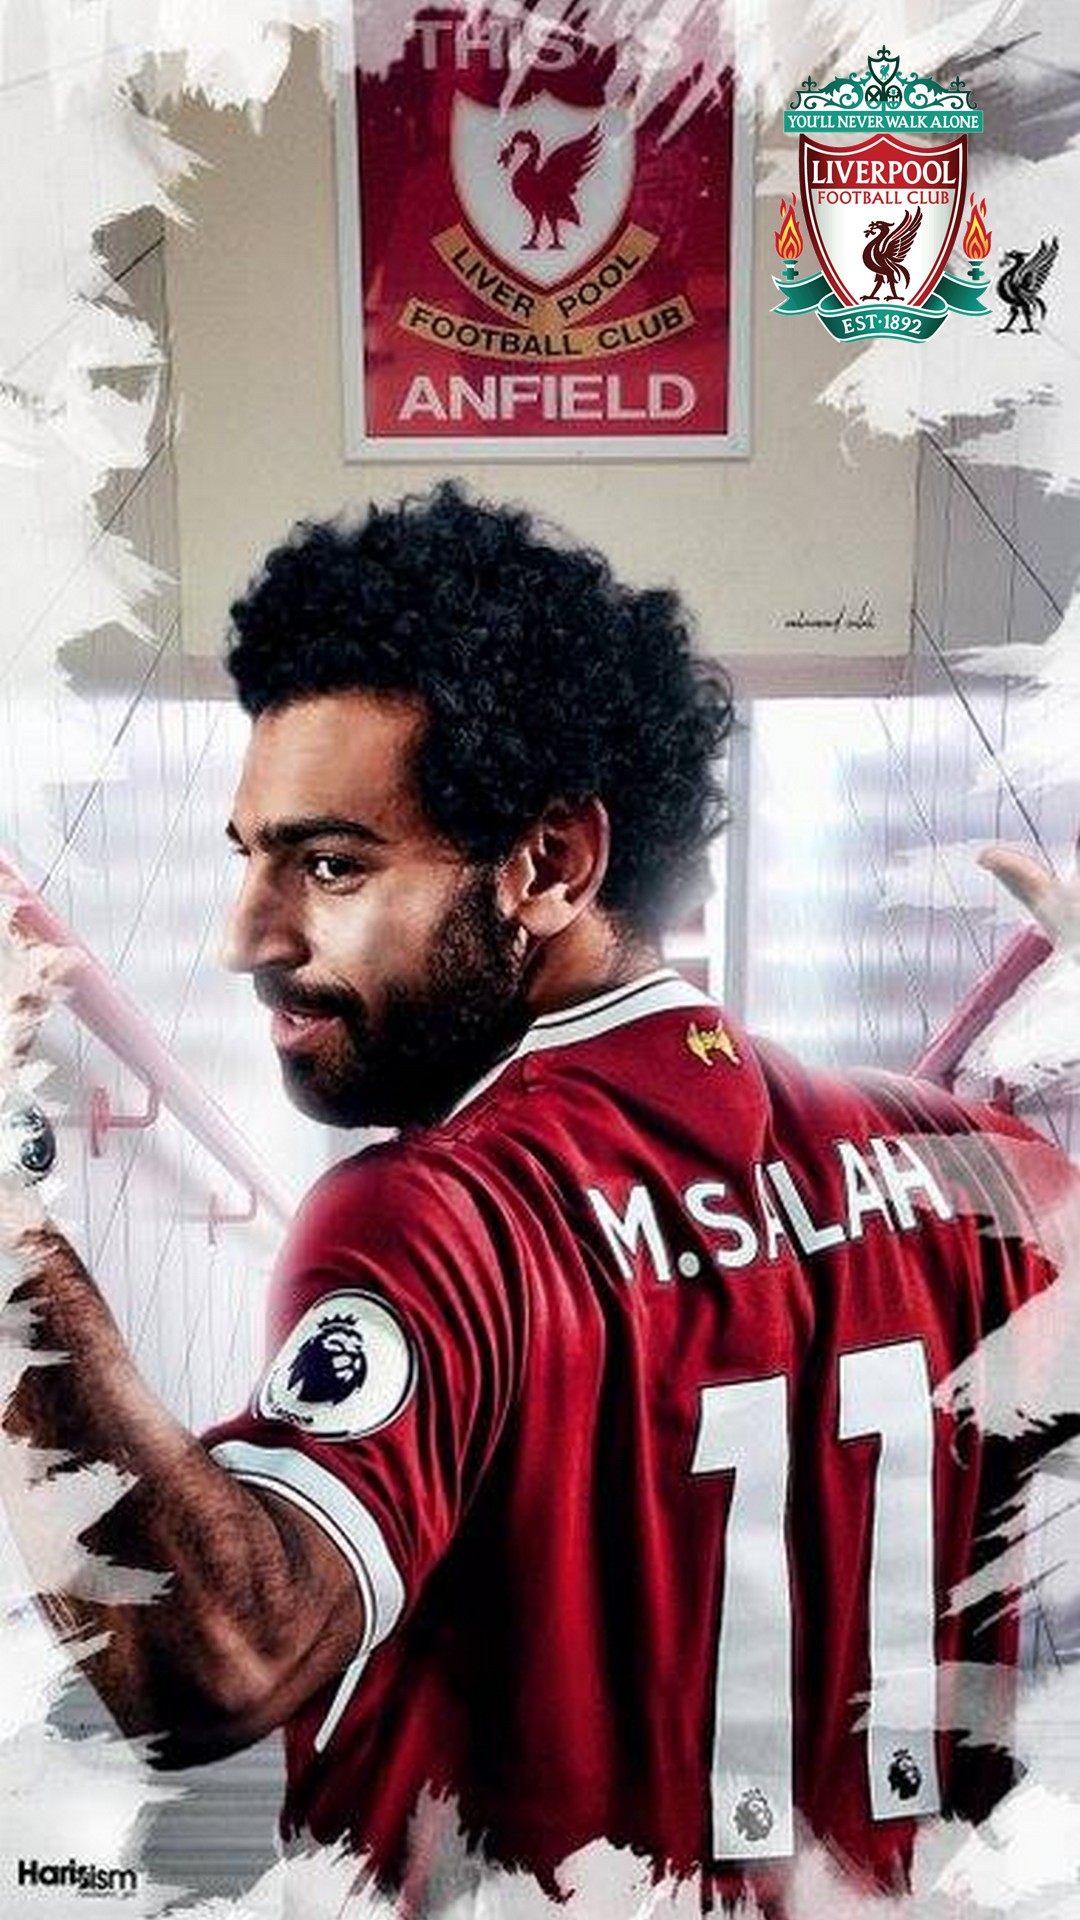 Mohamed Salah Pictures iPhone Wallpaper with resolution 1080X1920 pixel. You can make this wallpaper for your iPhone 5, 6, 7, 8, X backgrounds, Mobile Screensaver, or iPad Lock Screen